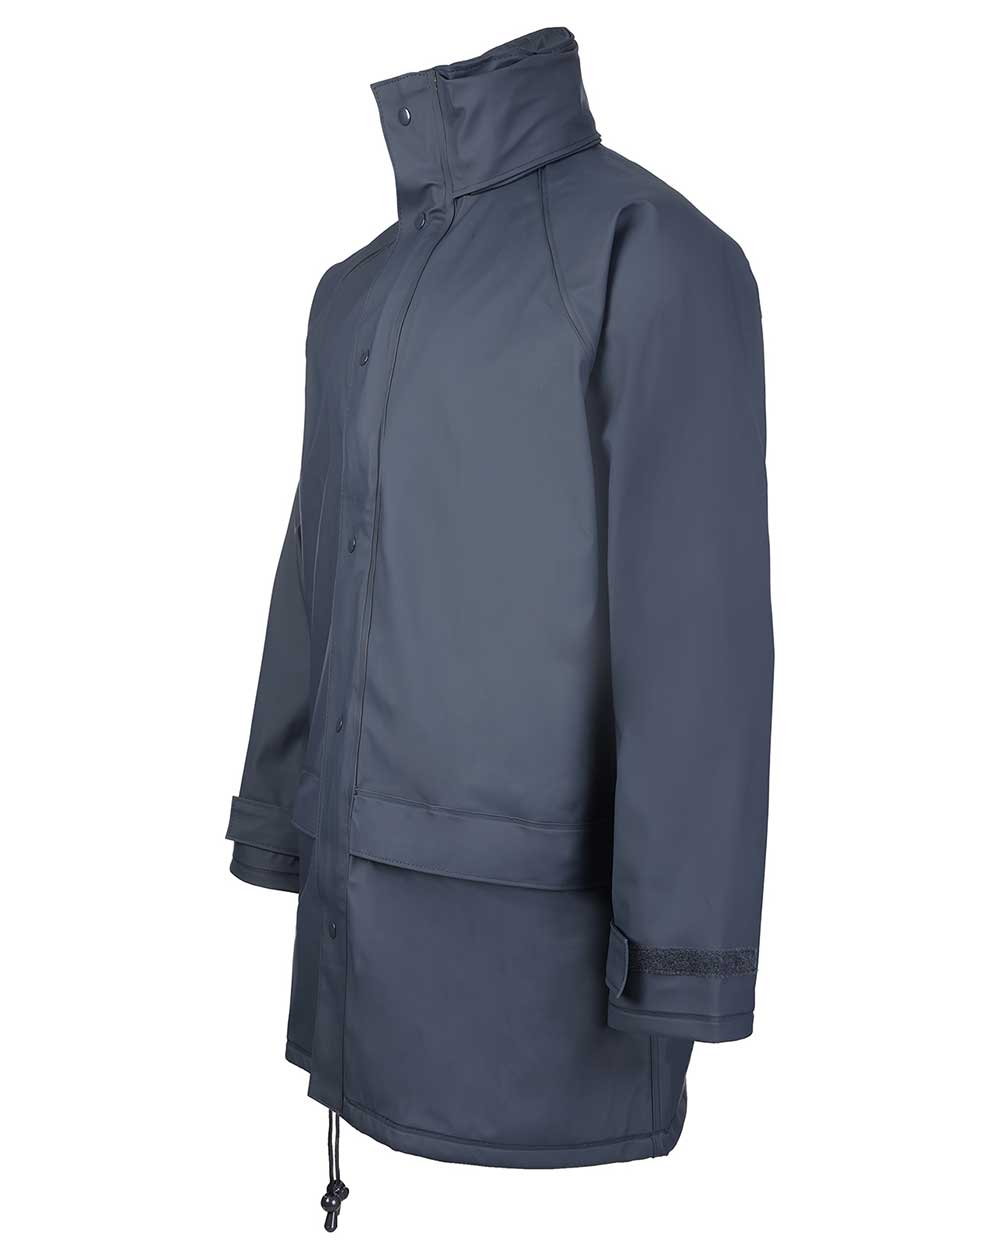 Side view Fort Fortex Flex Waterproof Jacket and trousers suit 